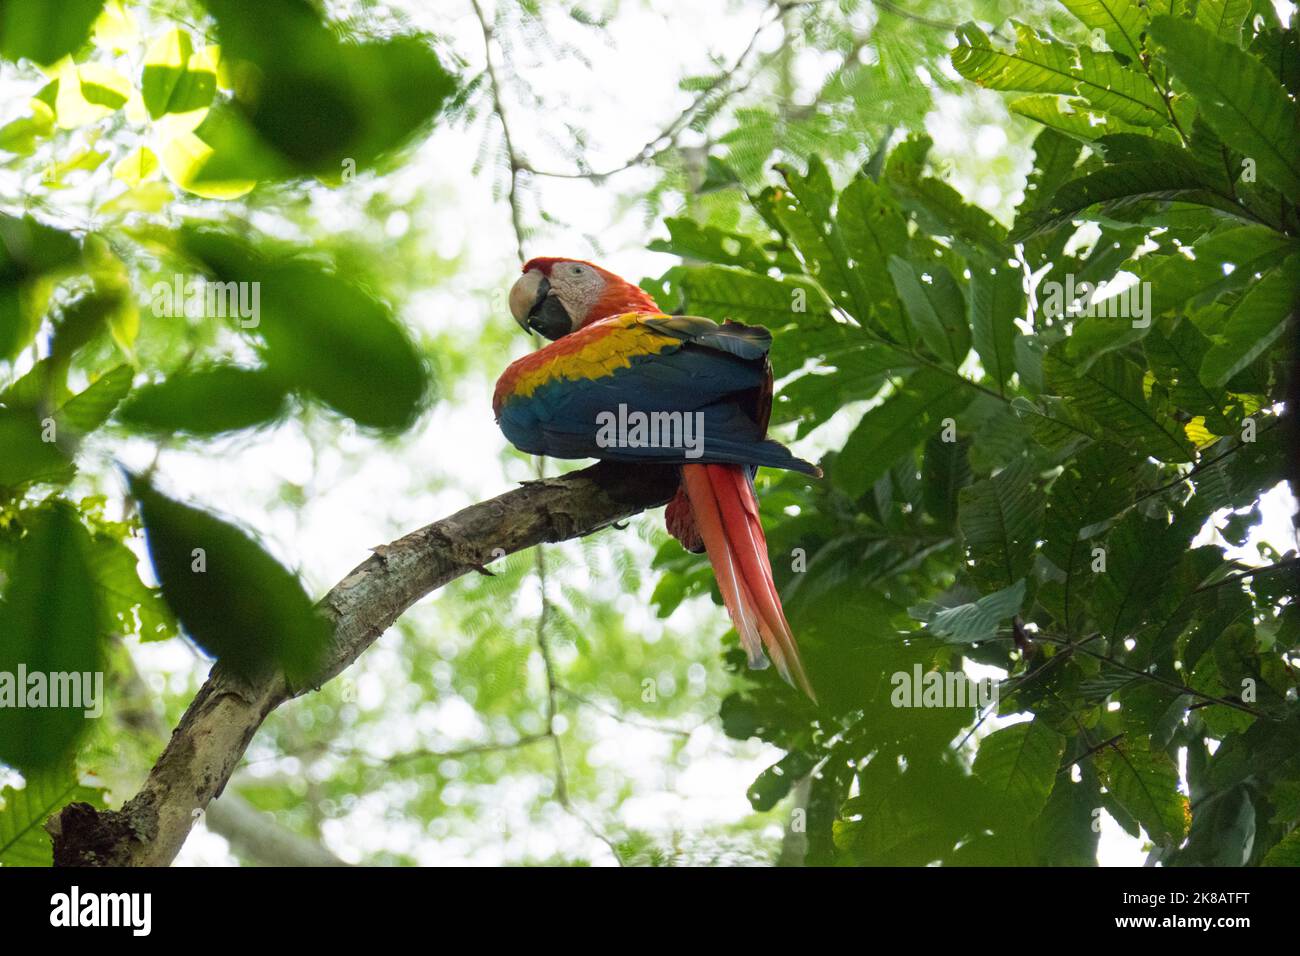 A scarlet macaw (Ara macao) perched on a tree branch in Chiapas, Mexico. Large red, yellow, and blue Central and South American parrot. Wild bird in j Stock Photo